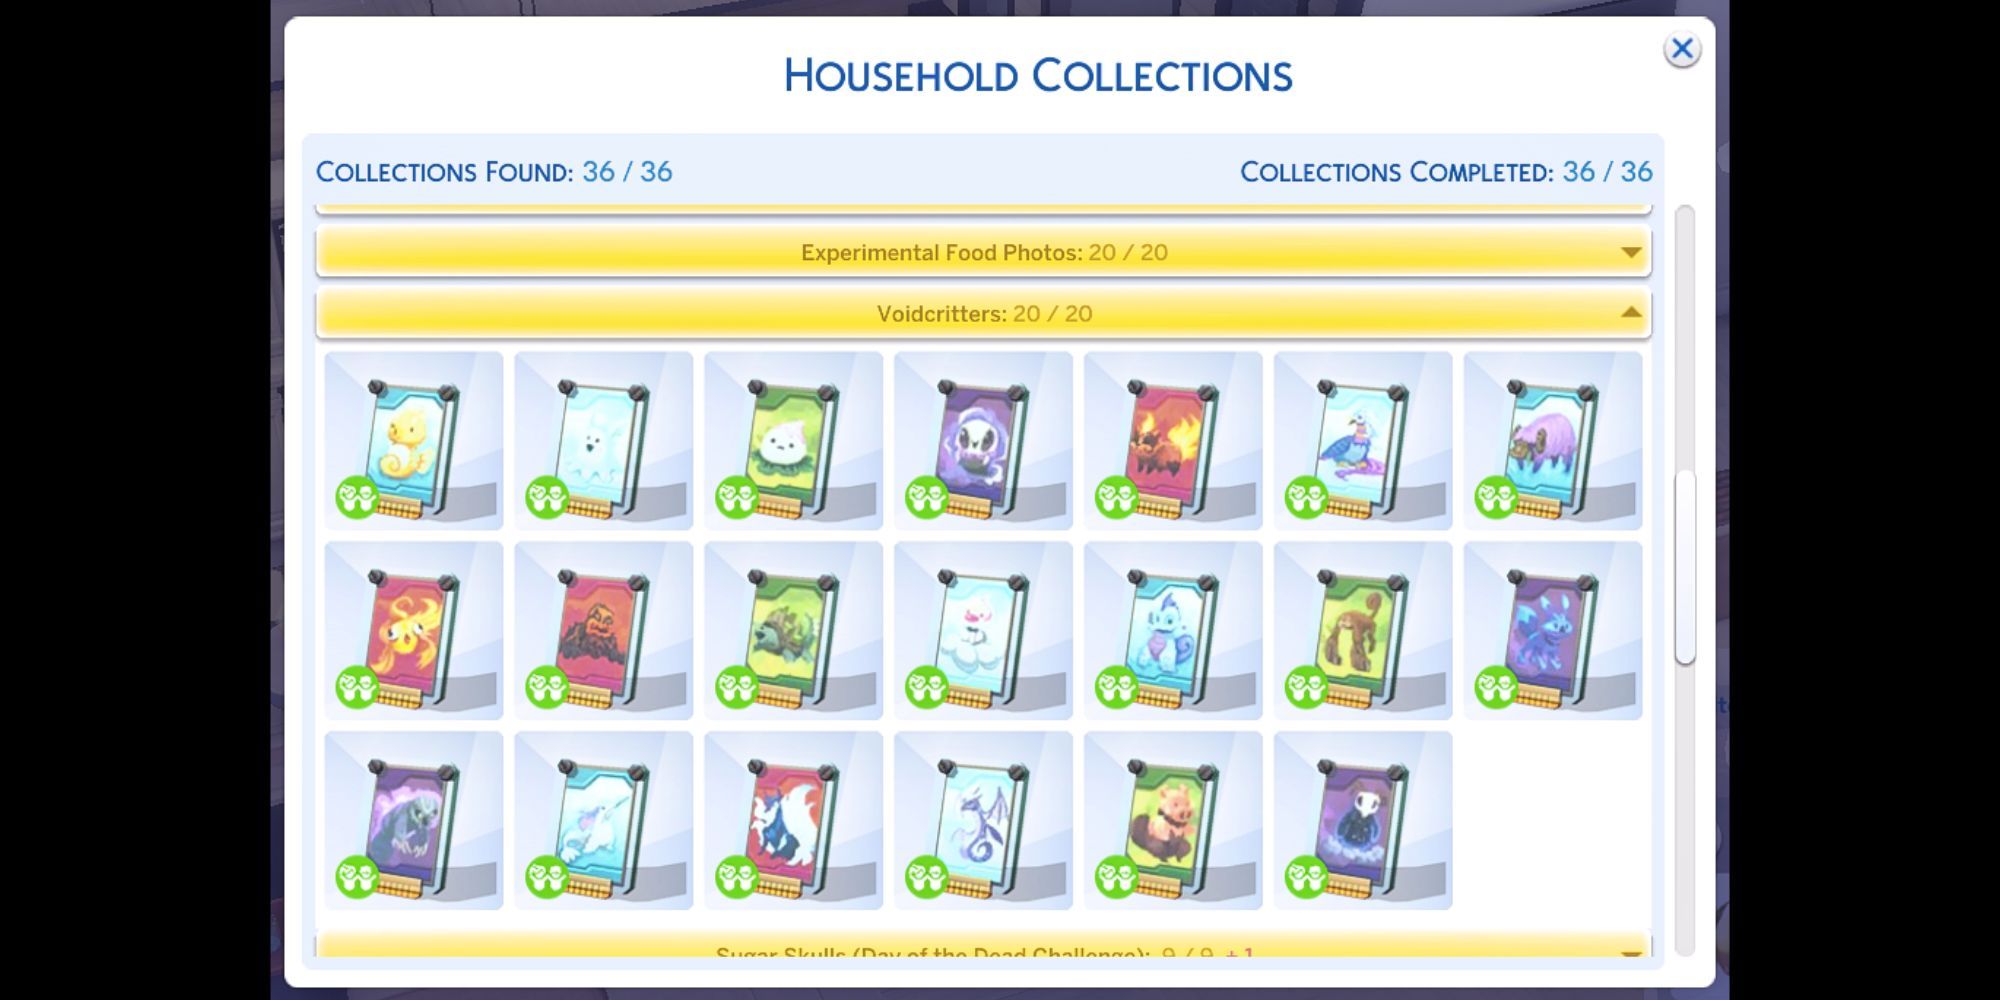 The Sims 4 Voidcritters Collection